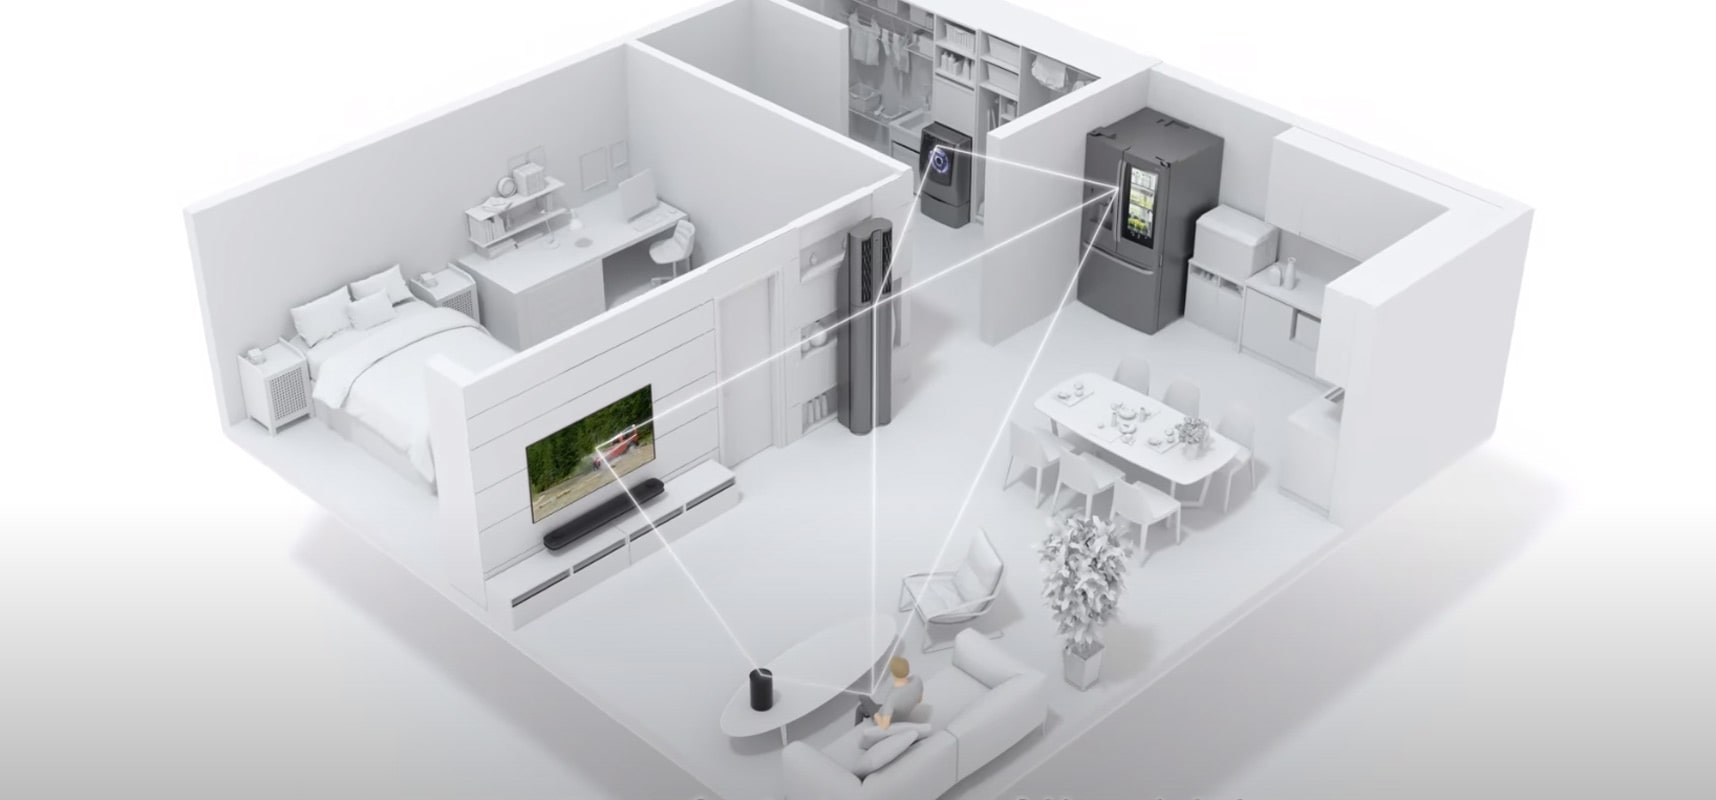 The layout of a home with ThinQ-connected appliances being linked